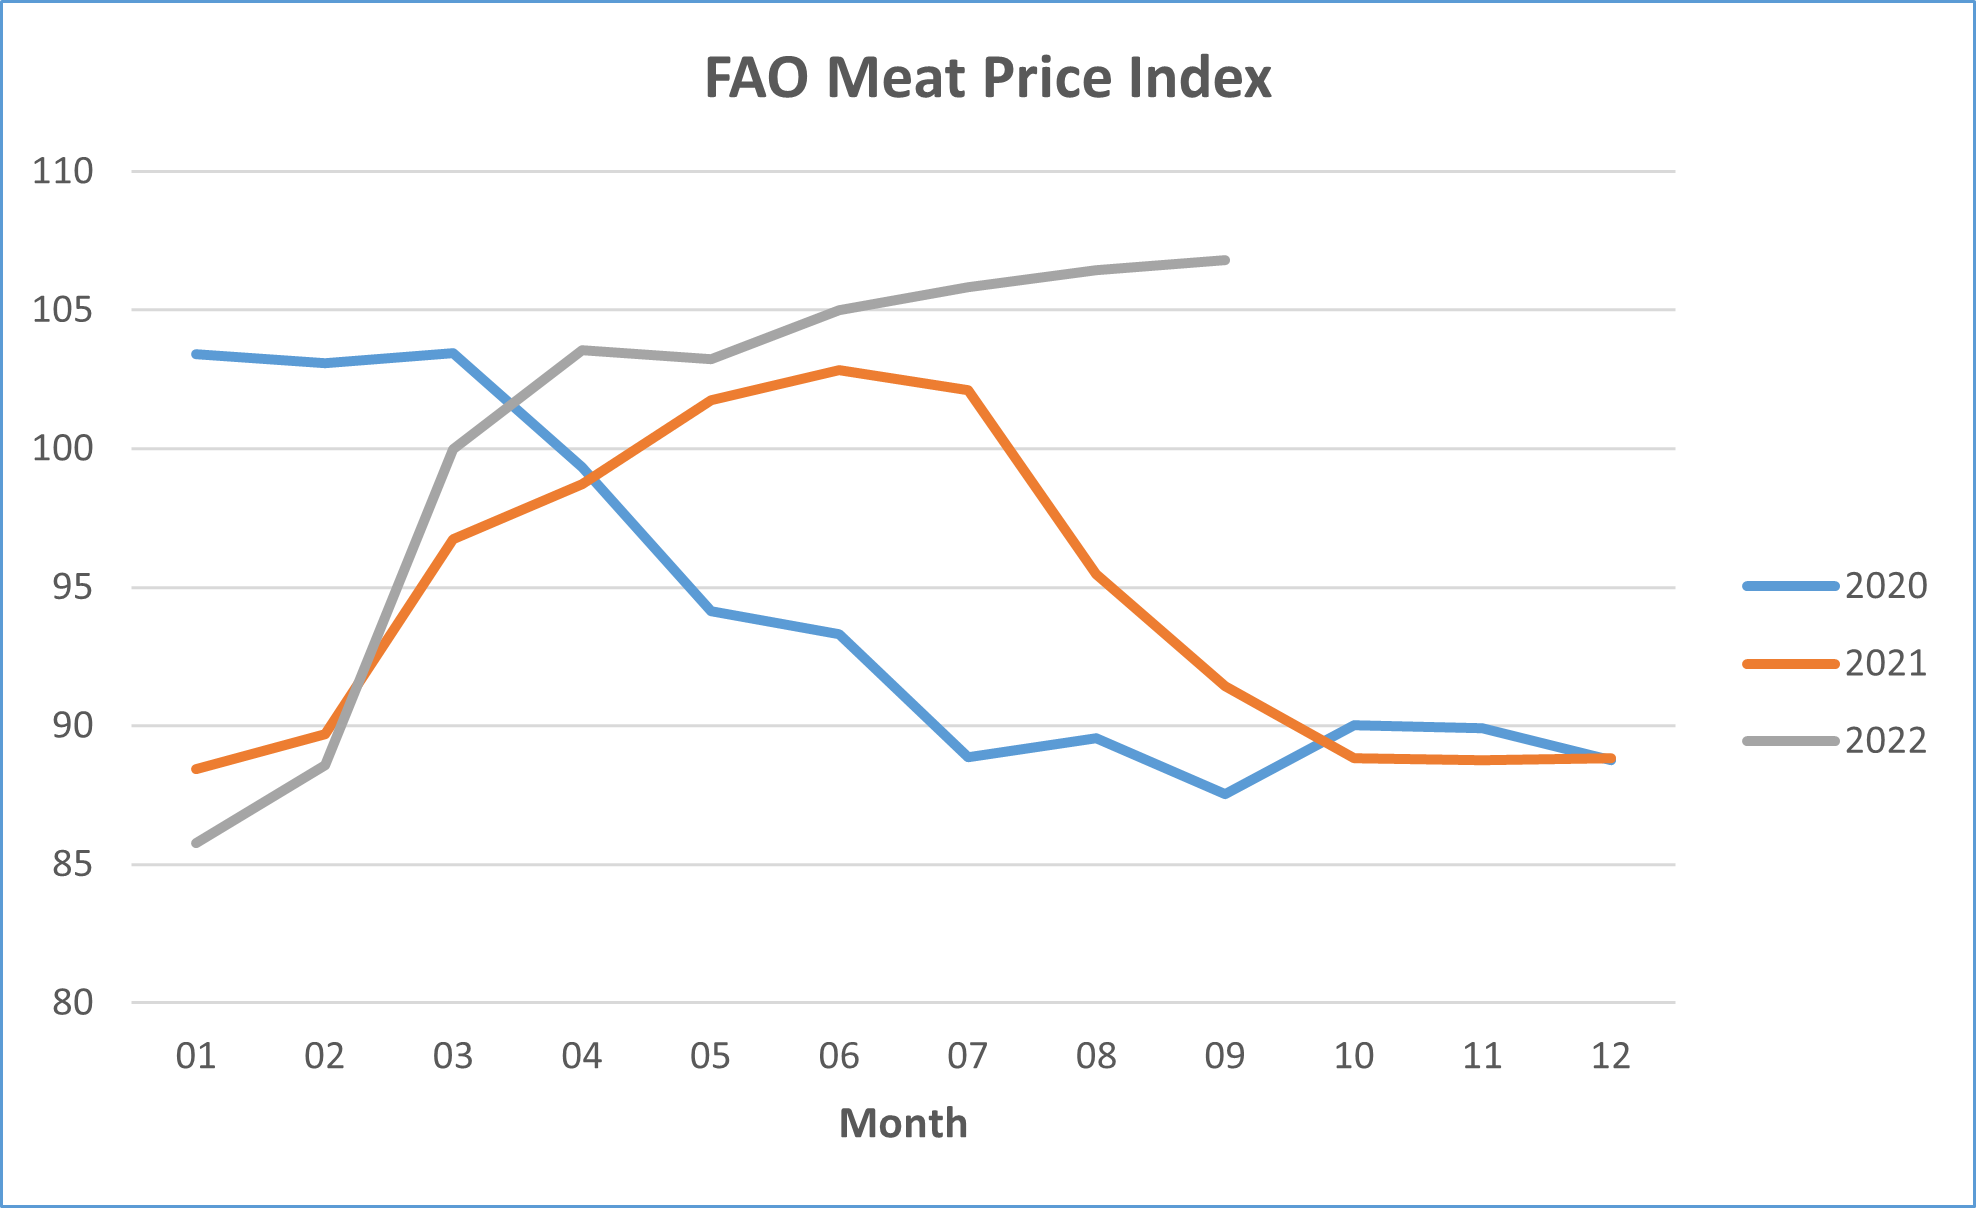 World pig meat prices increased in September